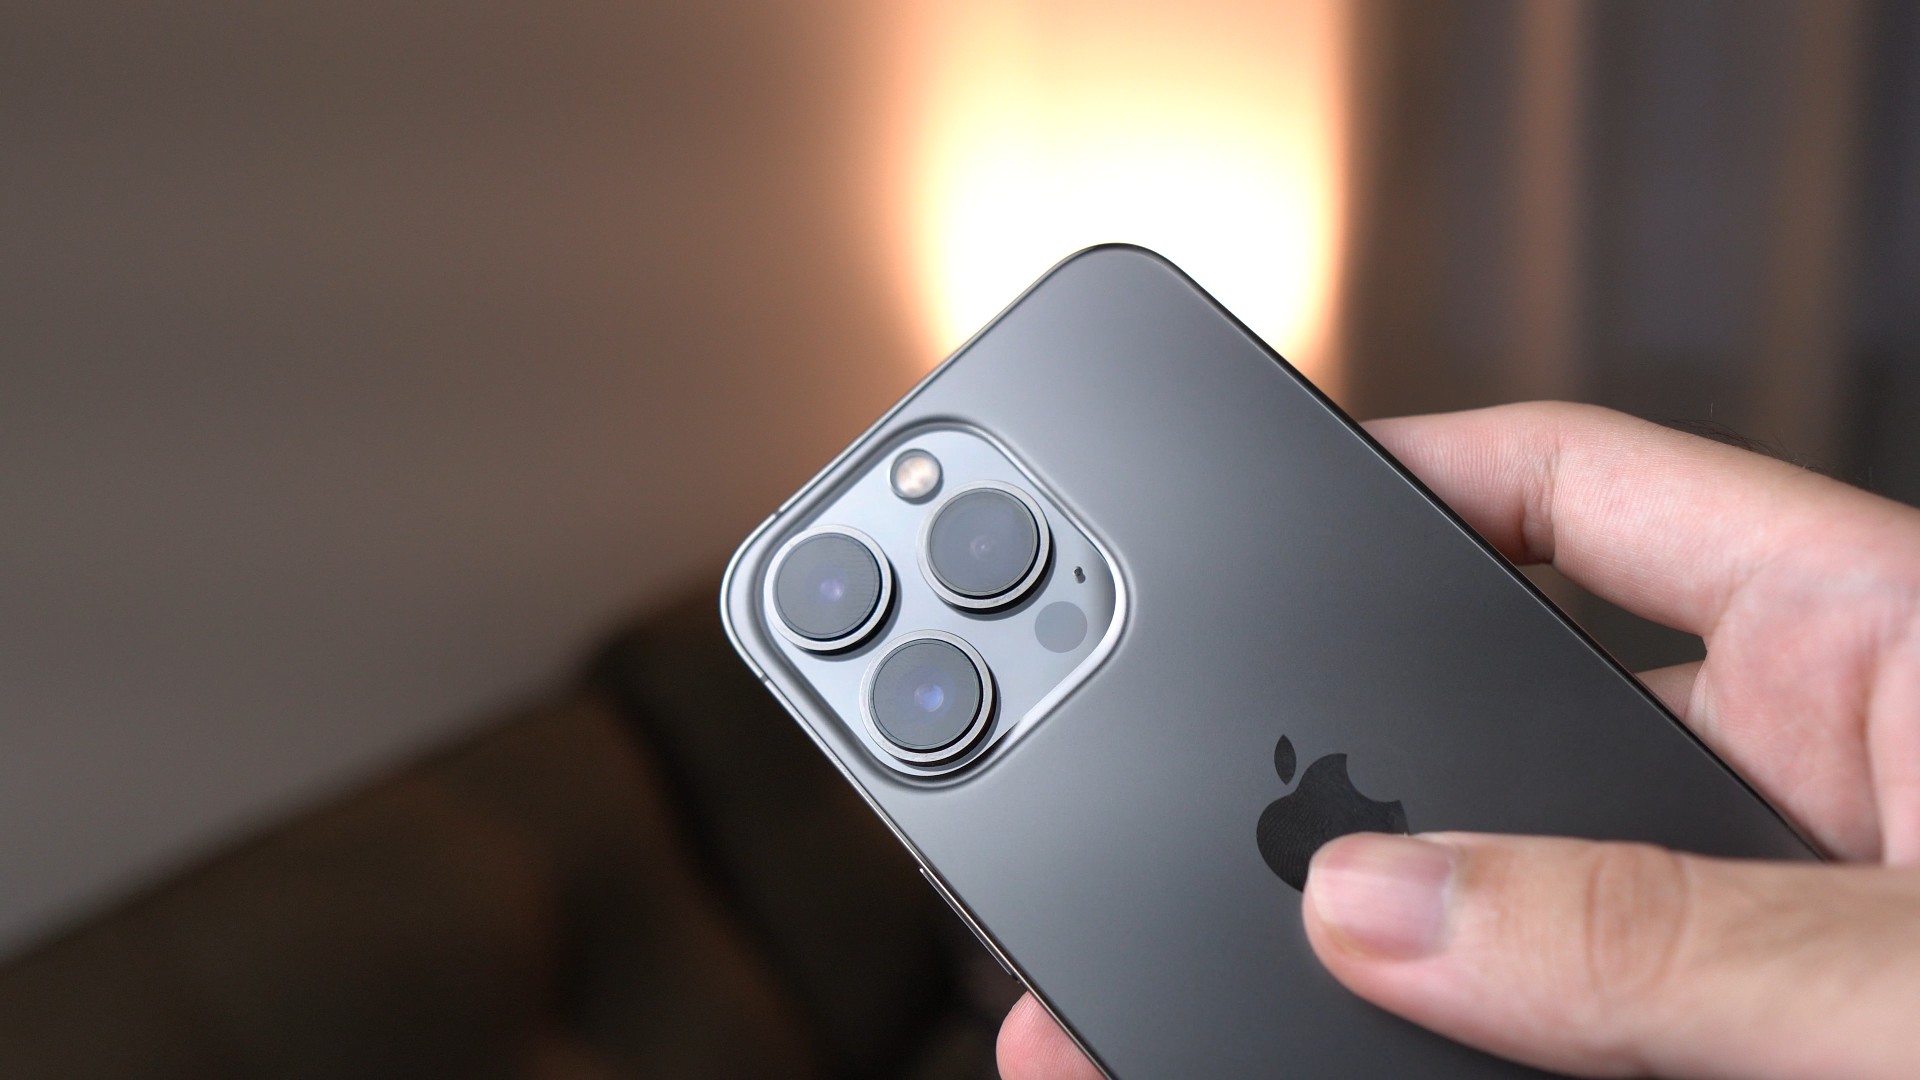 Apple sued by Canadian company for infringing iPhone camera patents